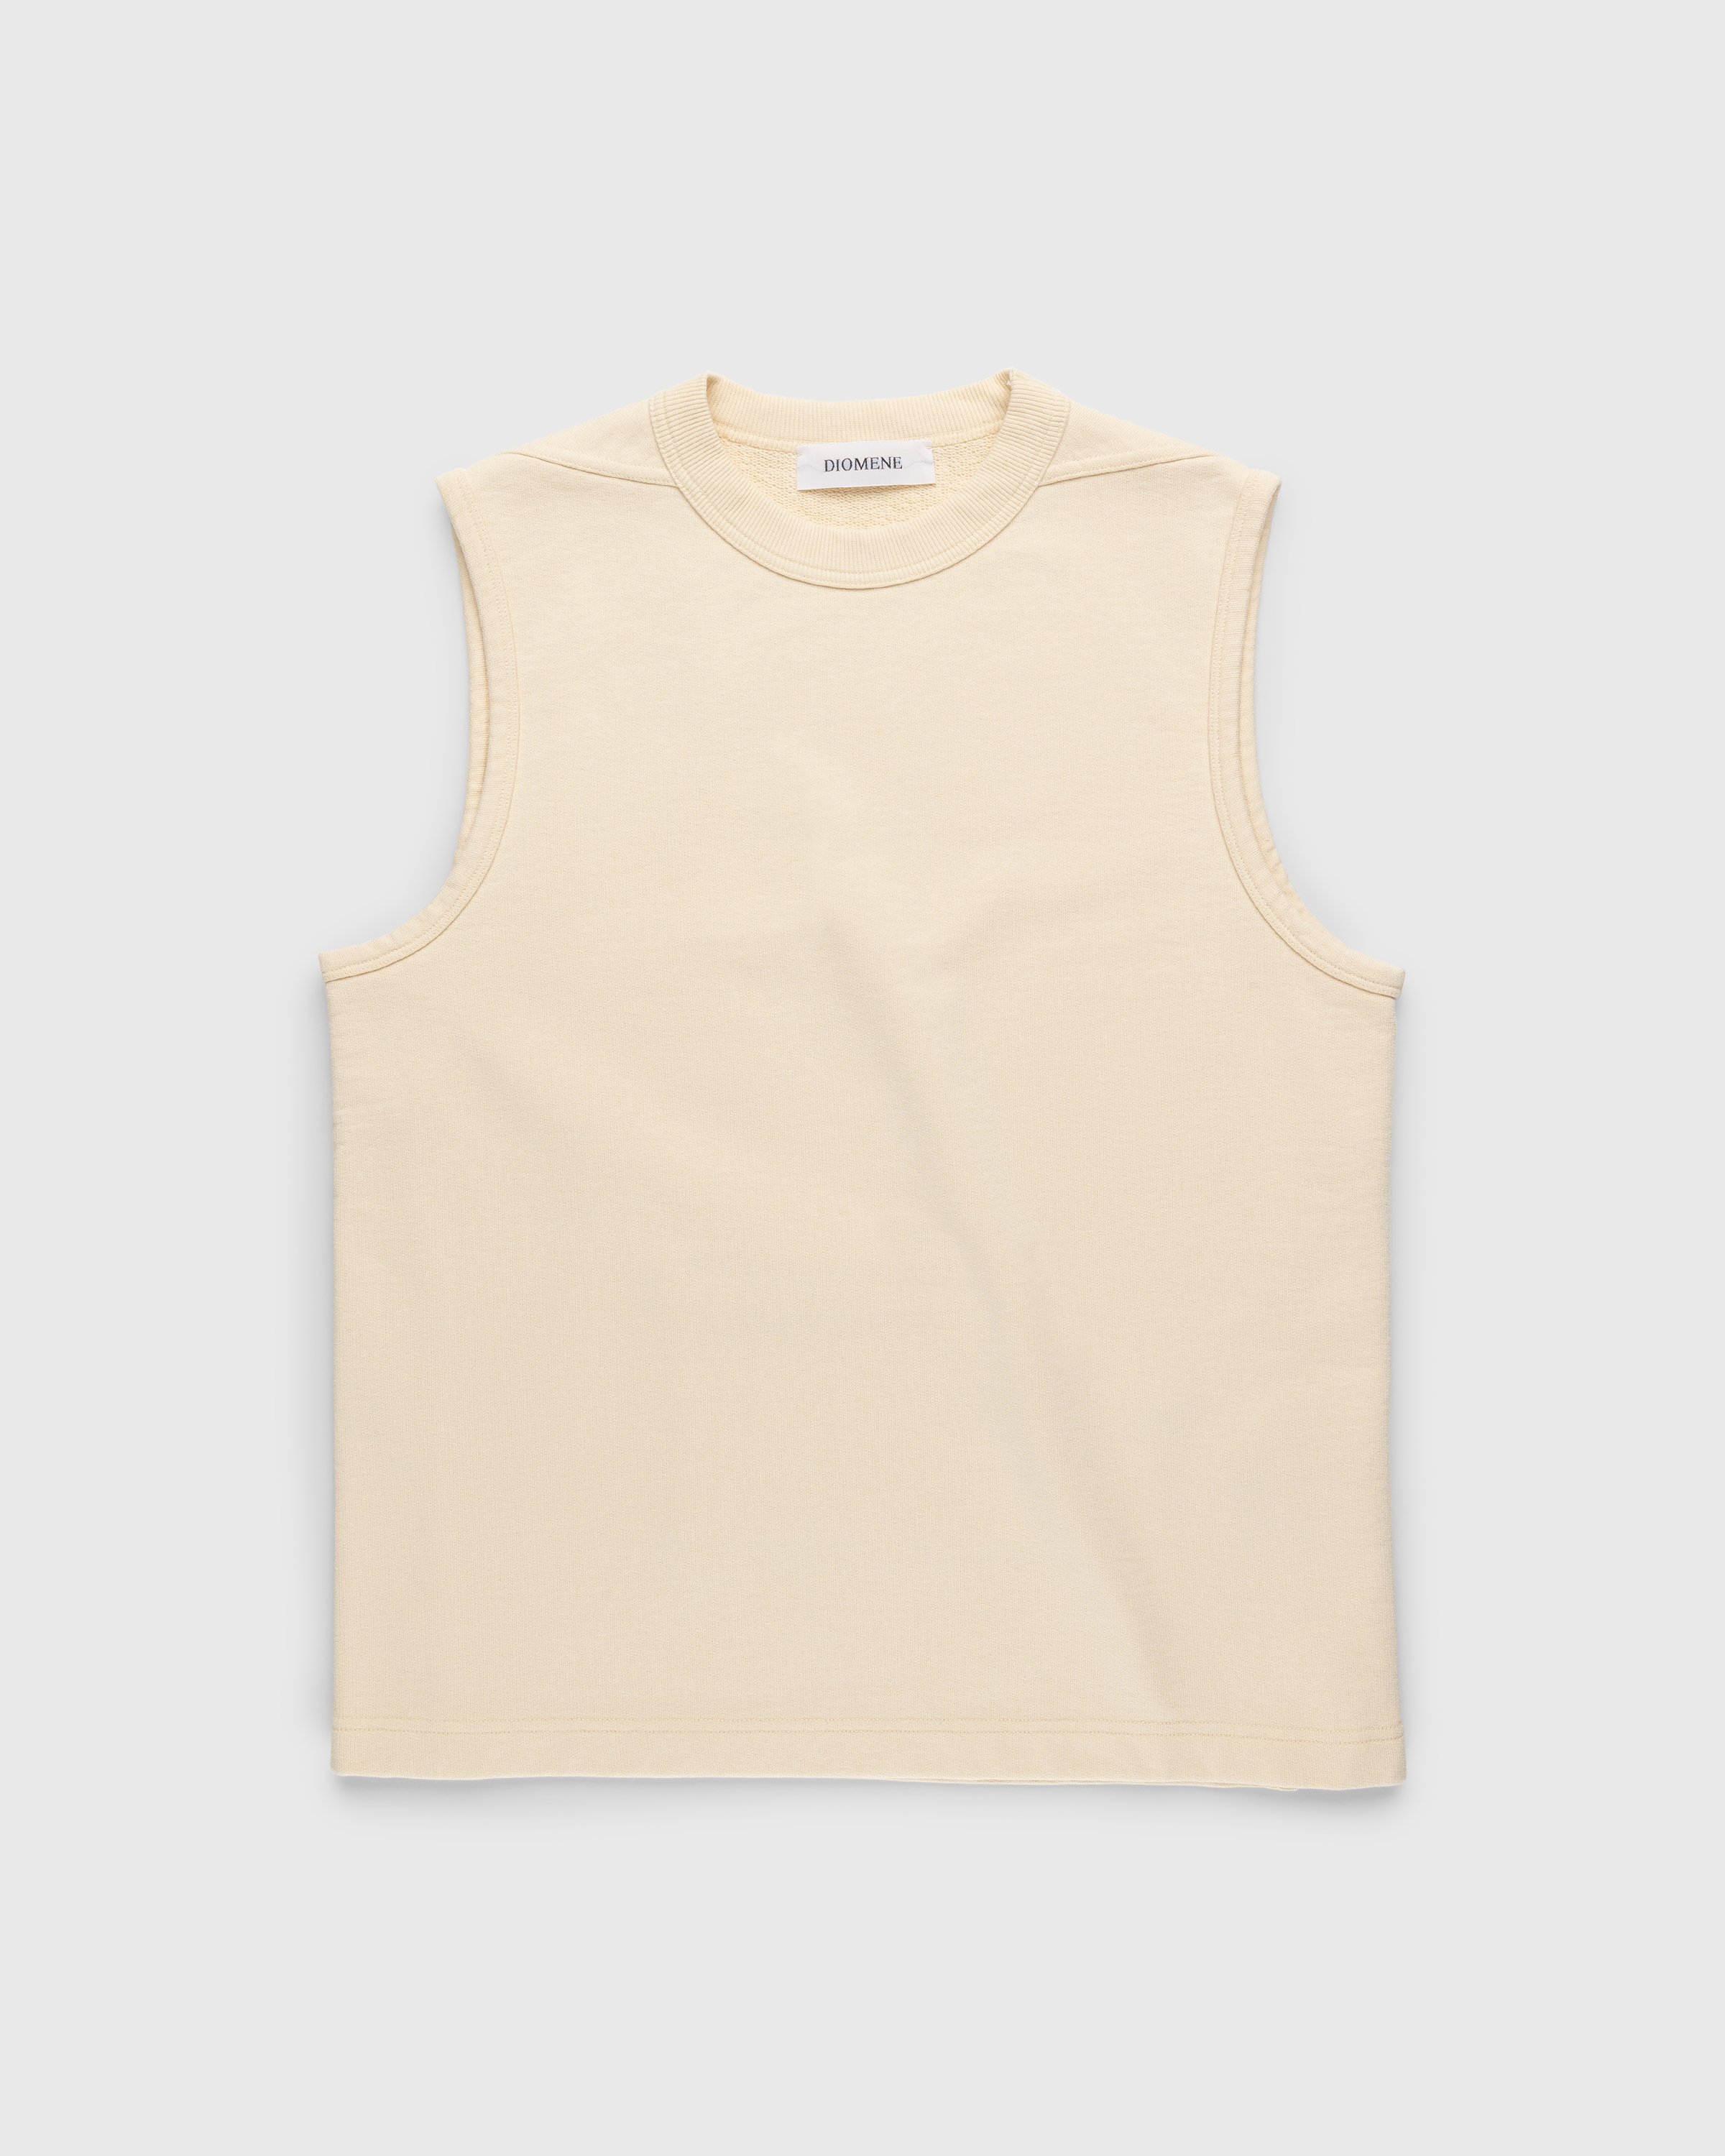 Diomene by Damir Doma - Cotton Gilet Cloud Cream - Clothing - Beige - Image 1